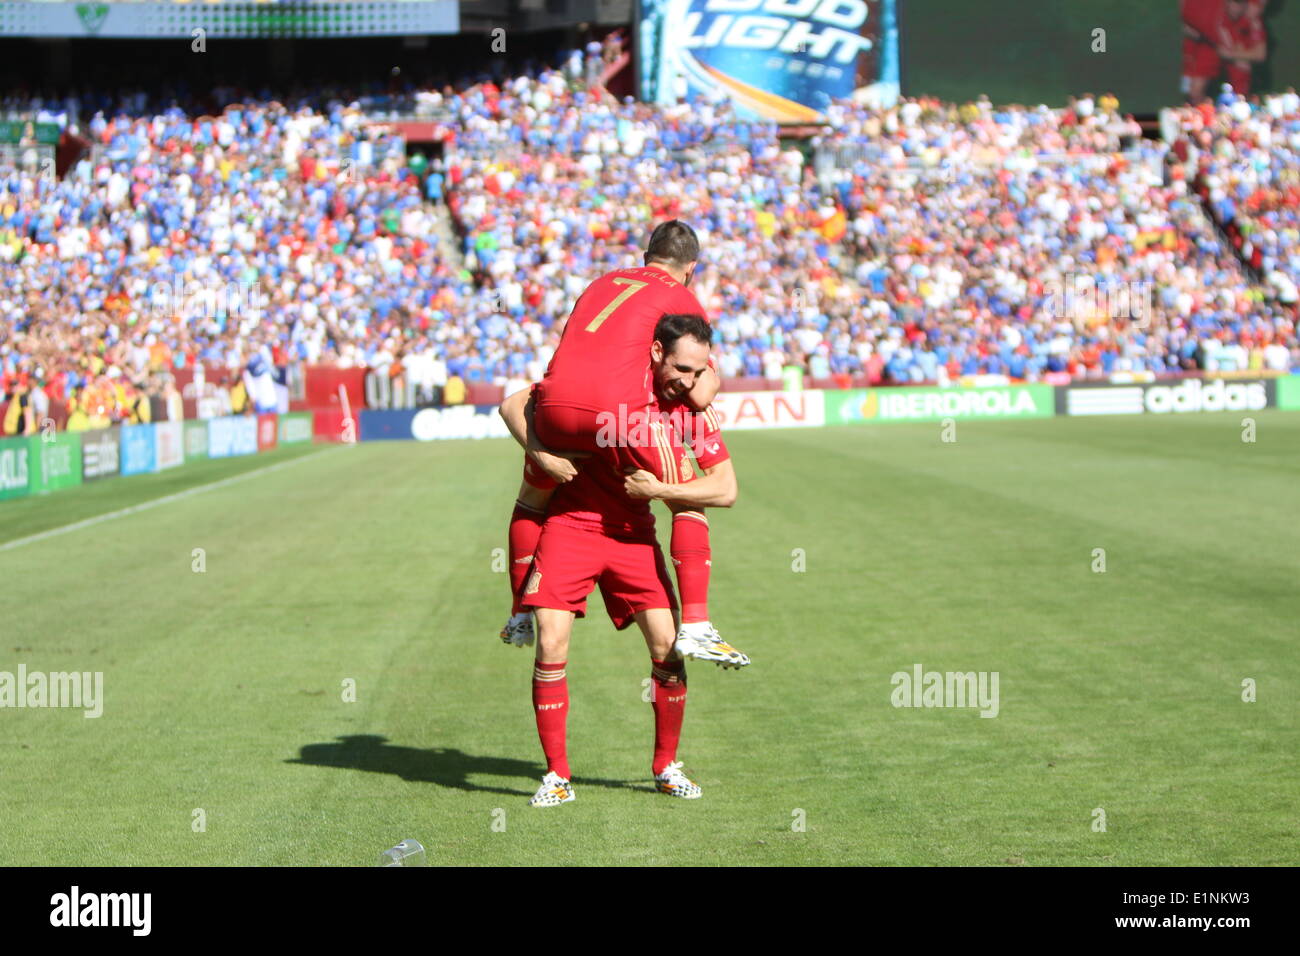 Washington, D.C, USA. 07th June, 2014. World Cup Soccer Warm up between Spain and El Salvador. Spain win 2-0, Goals by Spain # 7 David Villa.David Villa is pickup by teammate after scoring. Credit:  Khamp Sykhammountry/Alamy Live News Stock Photo